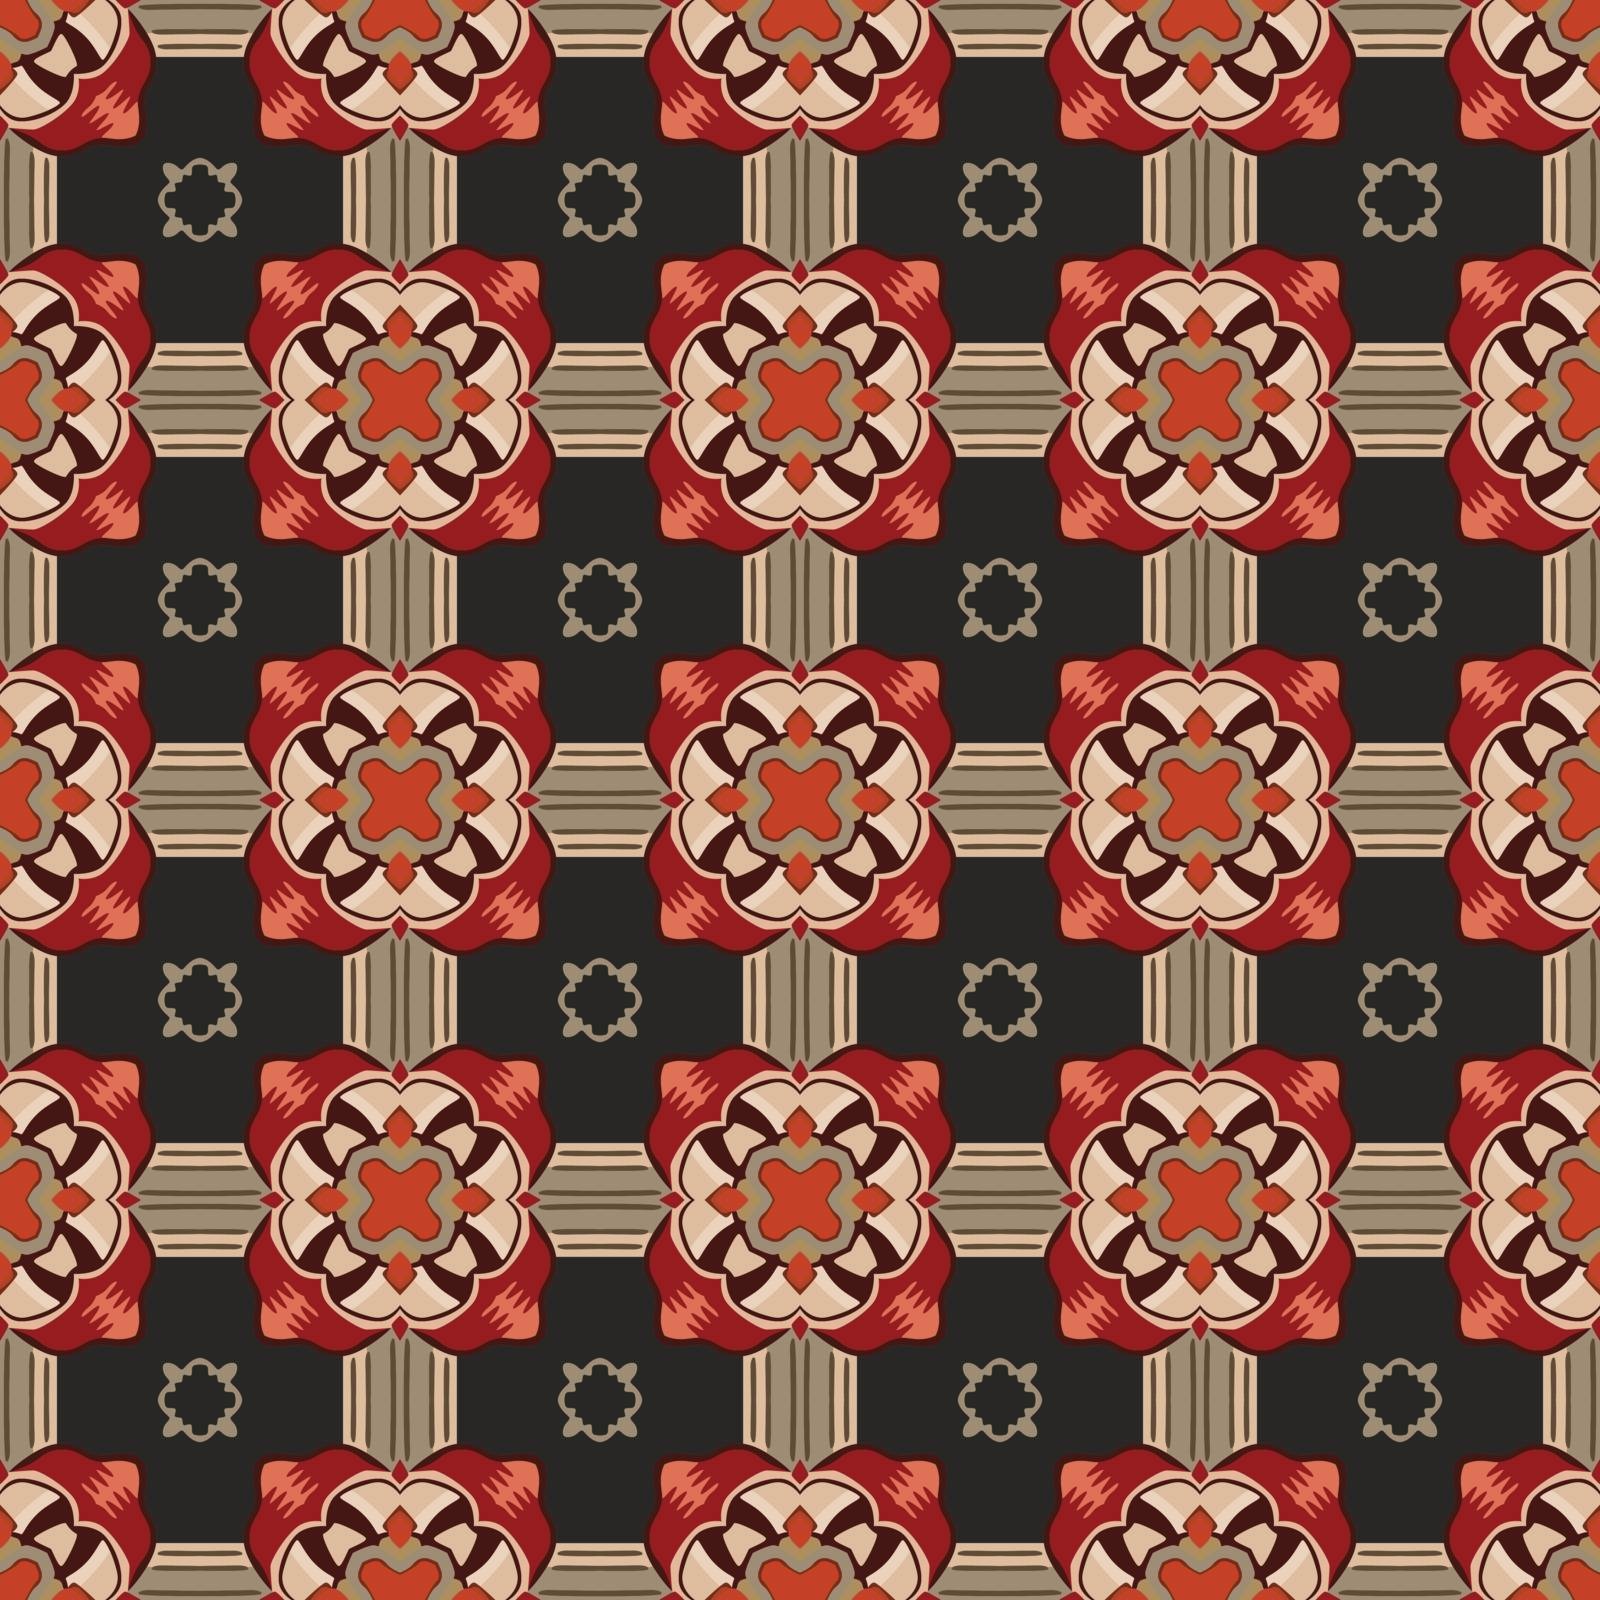 Seamless illustrated pattern made of abstract elements in beige, red, brown, gray and black